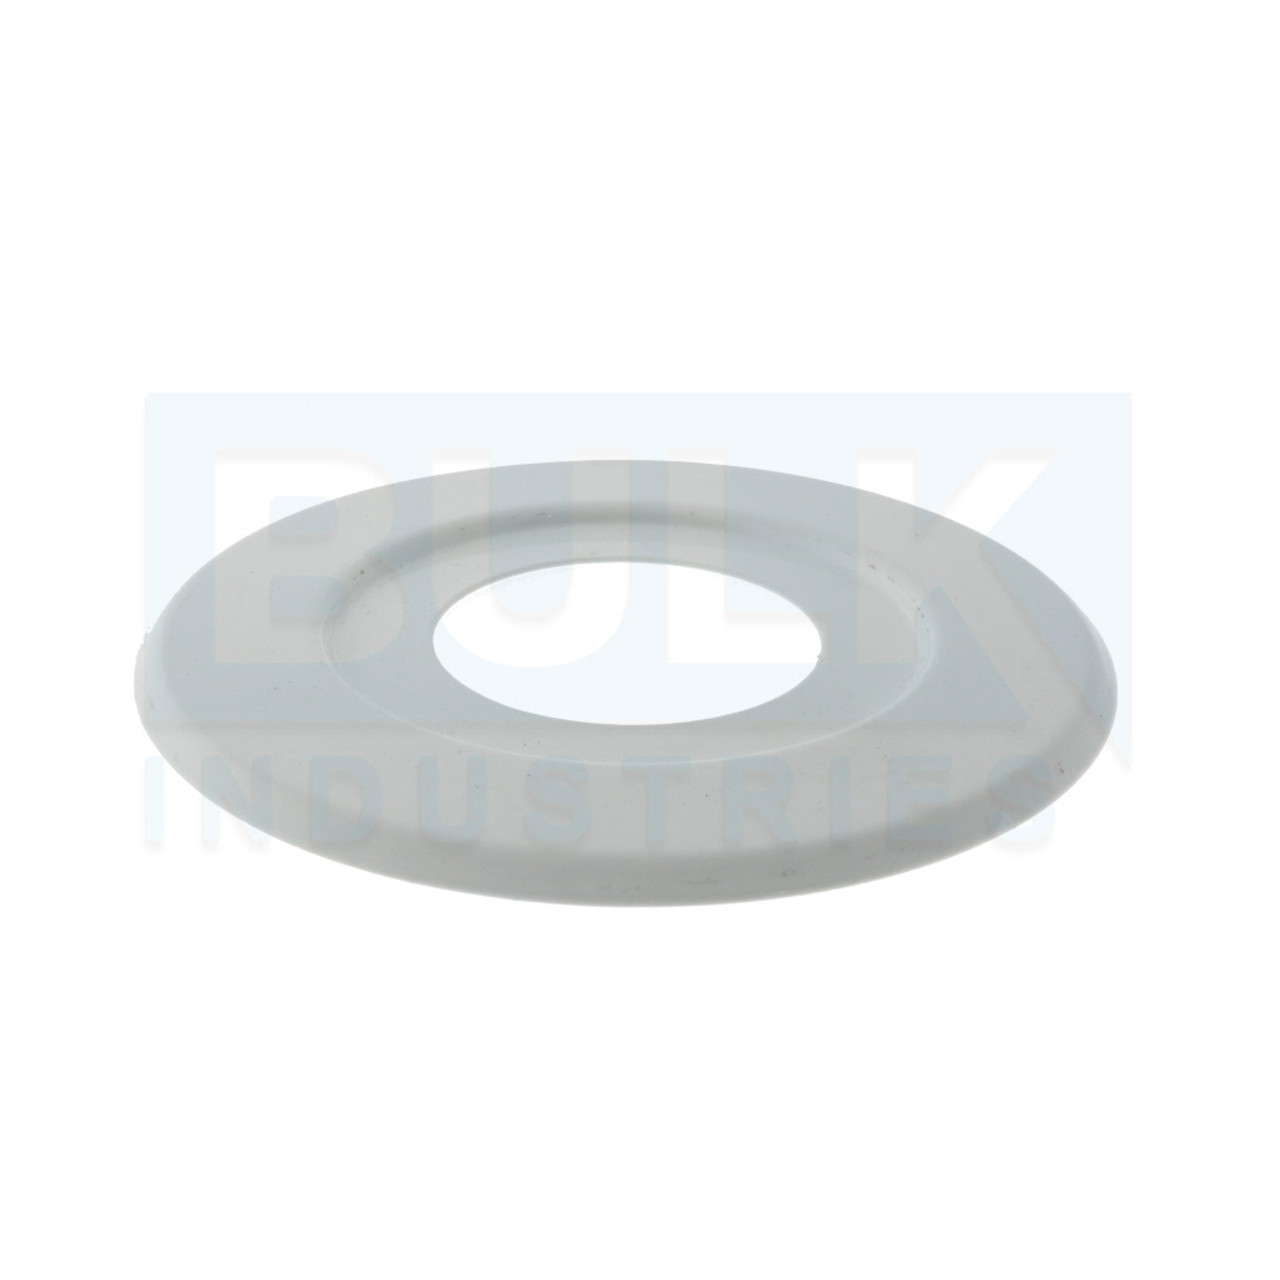 Universal Escutcheon Extender Expansion Ring, 5 Step Down